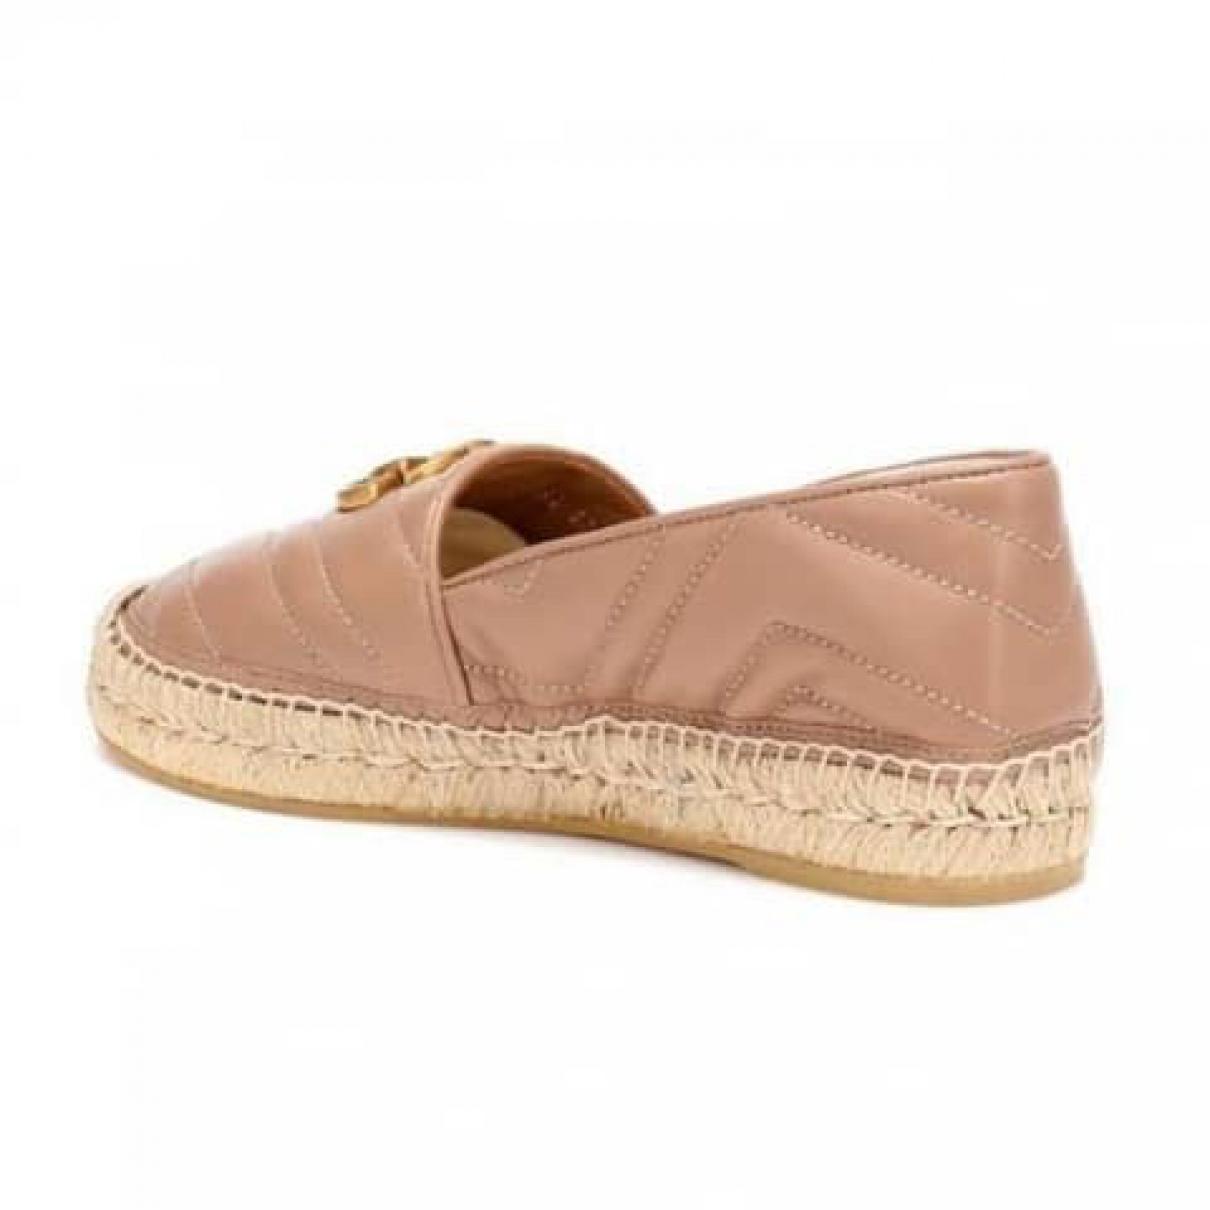 Marmont leather flats - 4